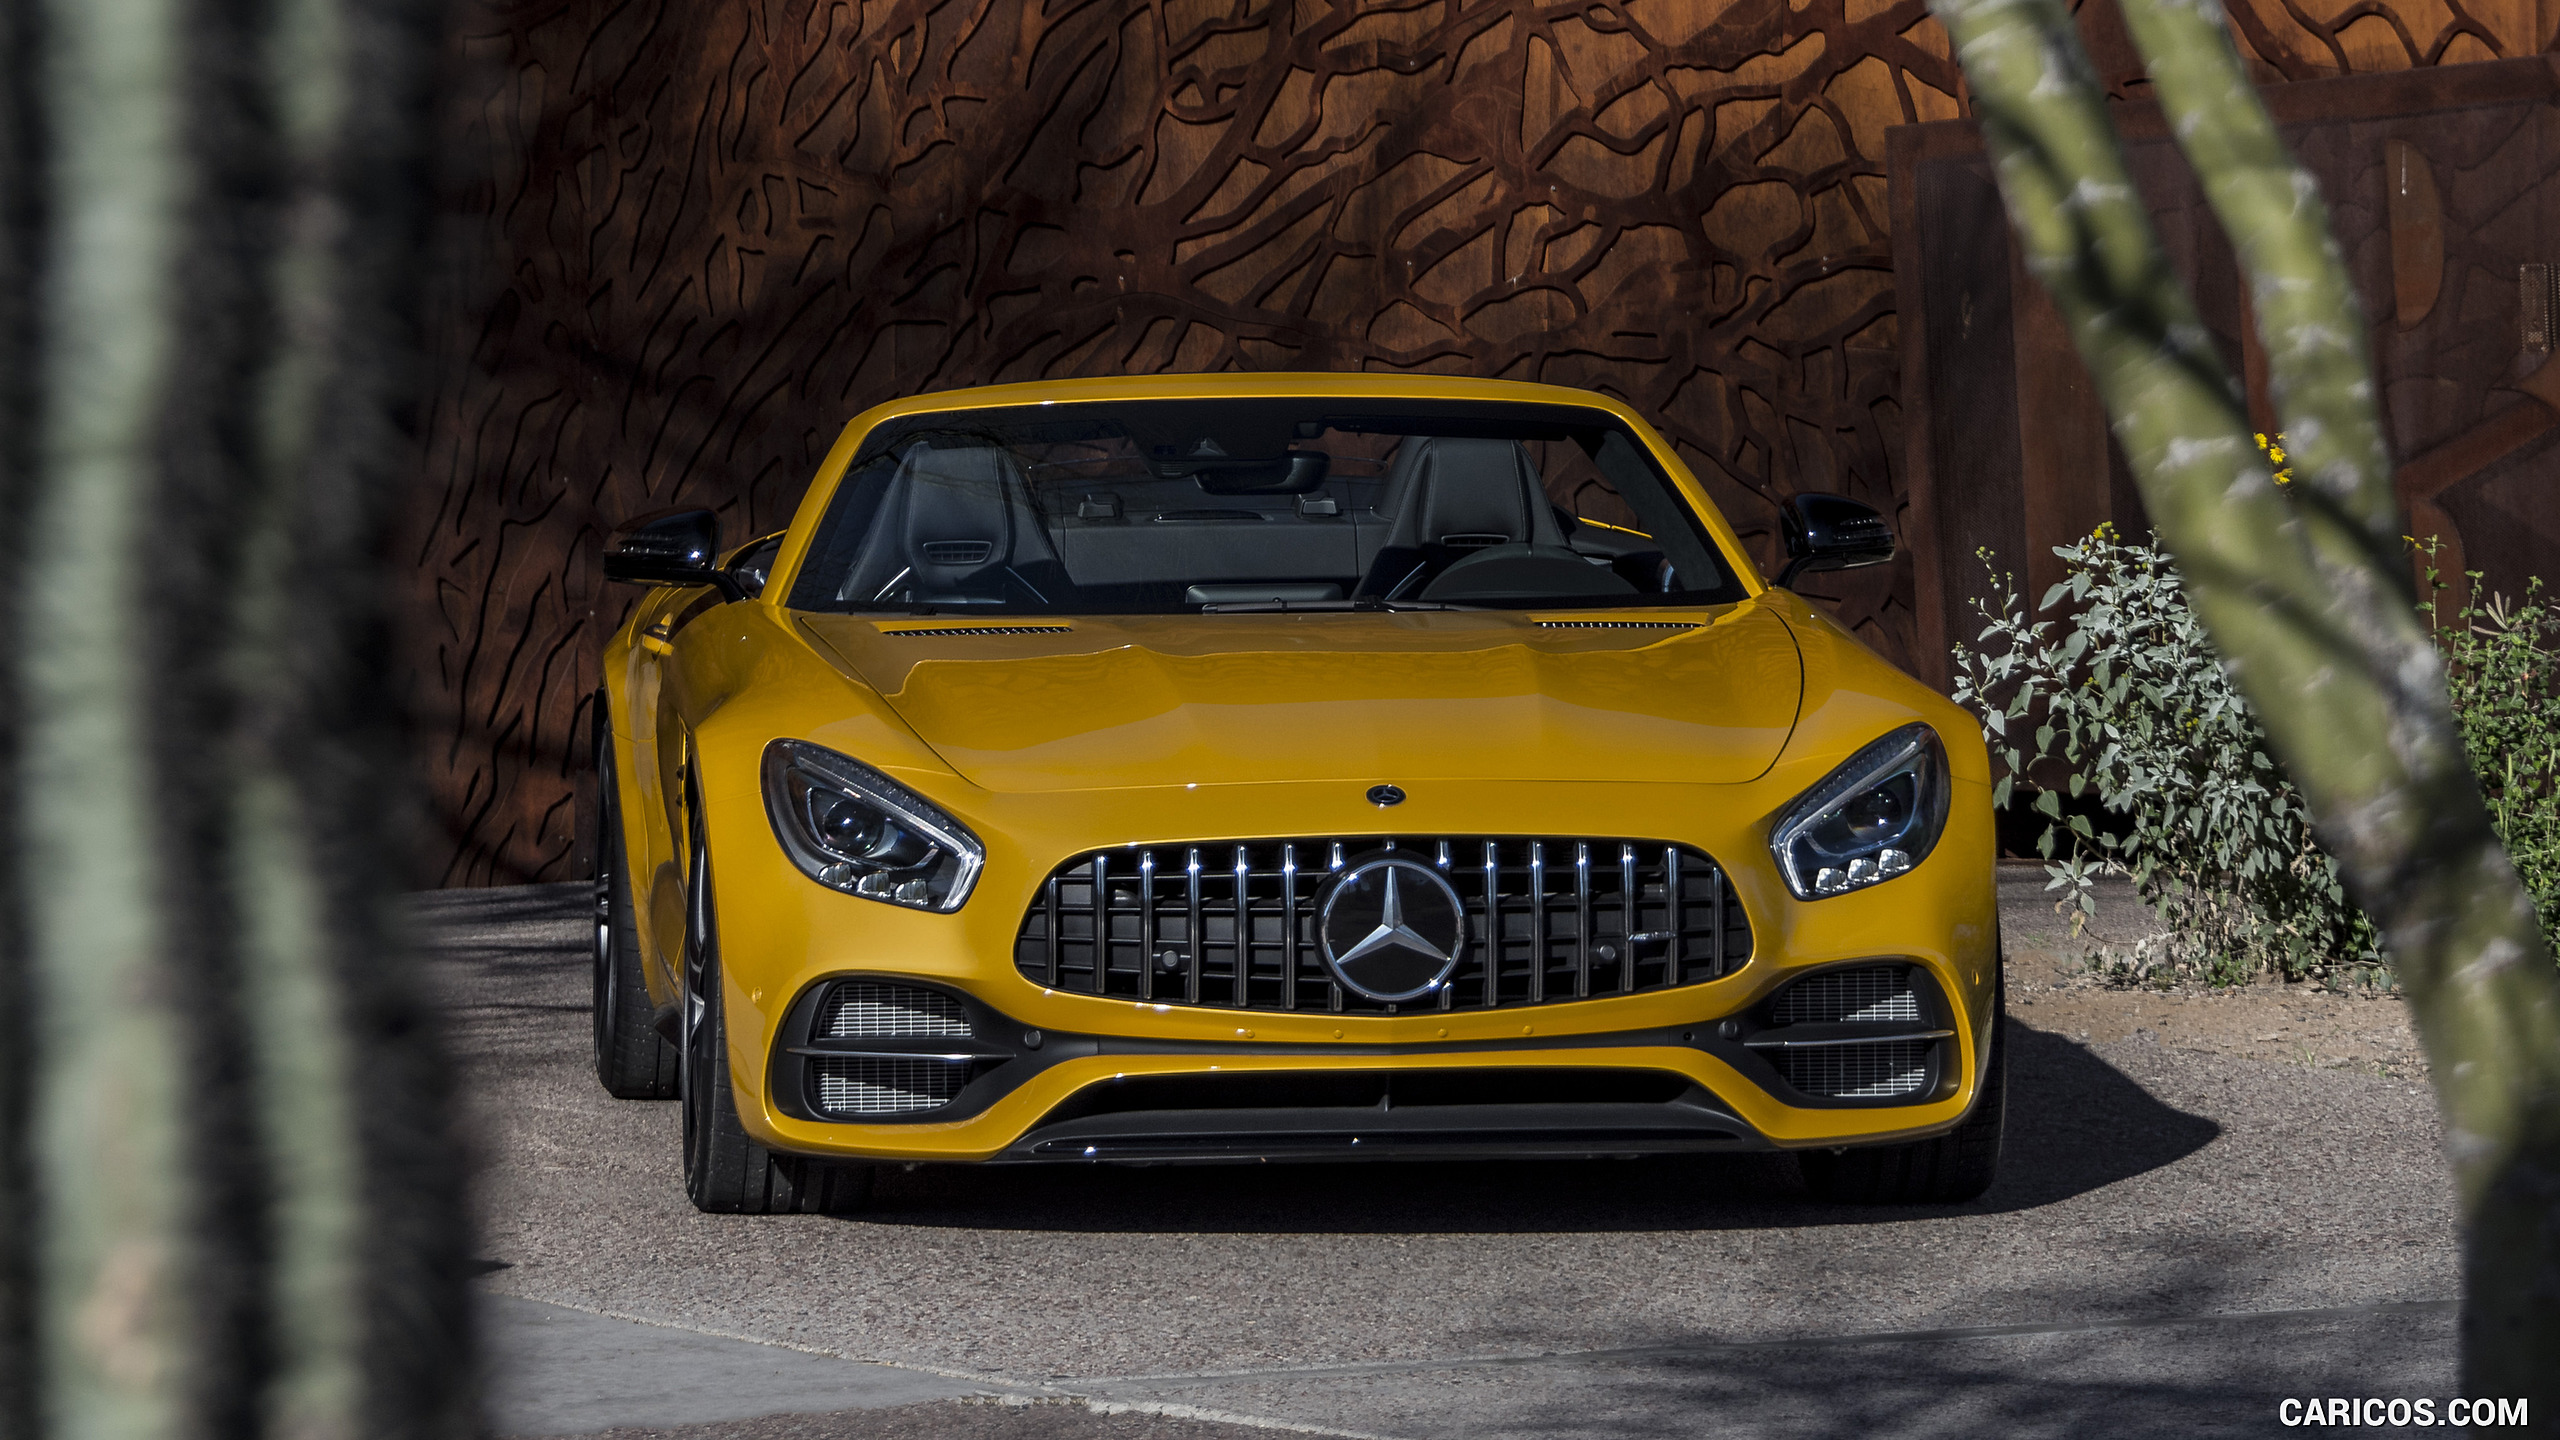 2018 Mercedes-AMG GT C Roadster - Front, #237 of 350